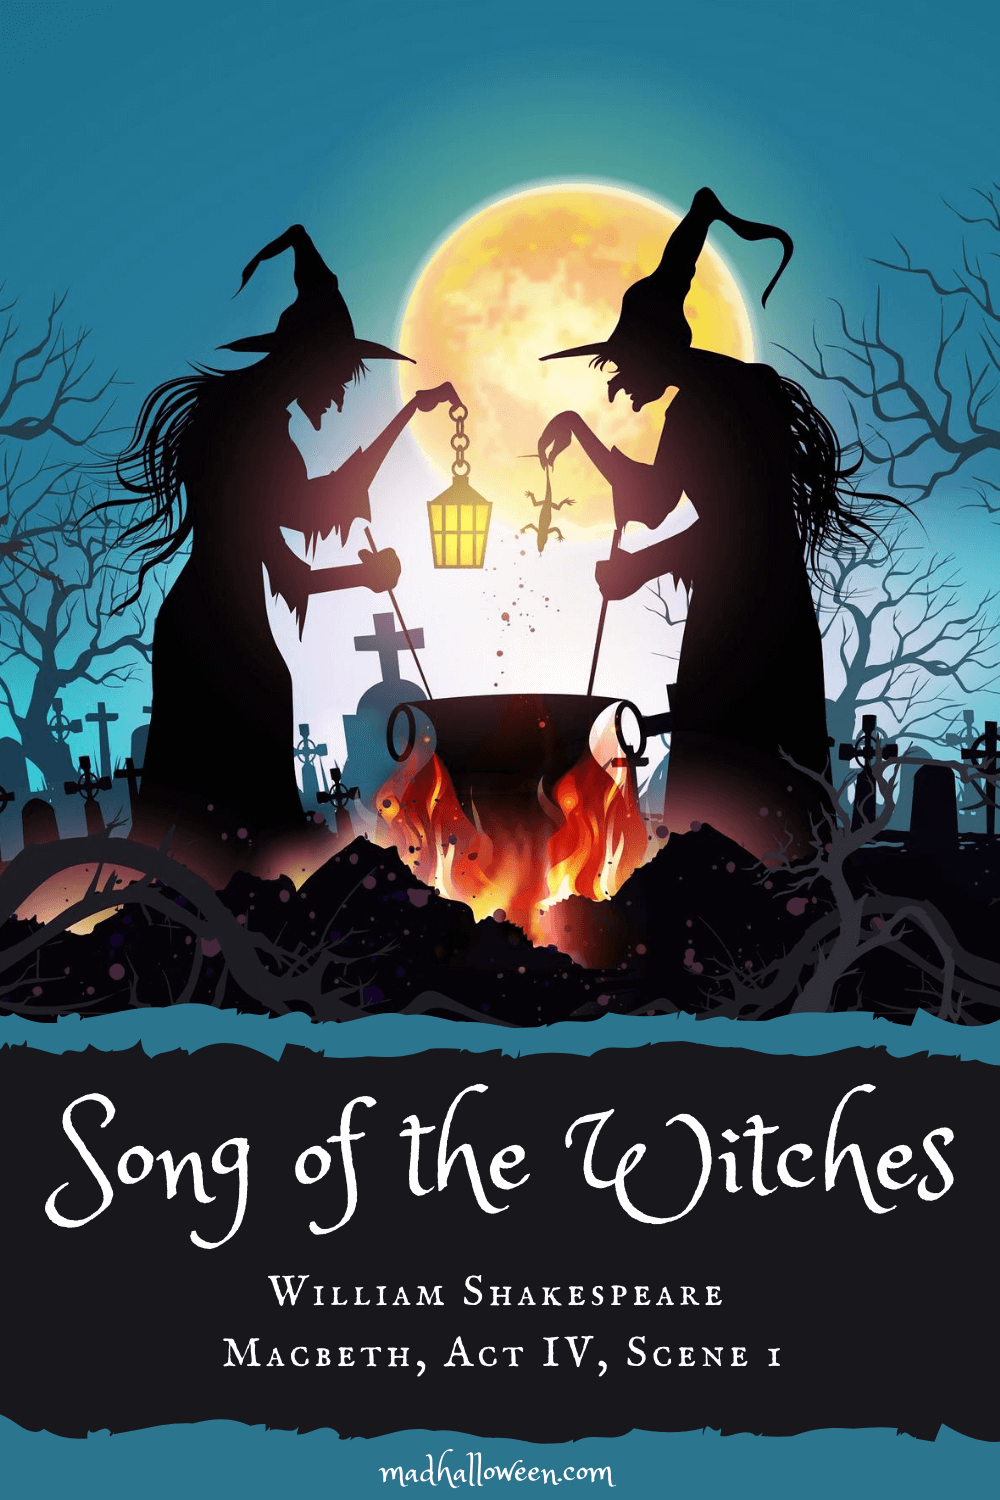 Song of the Witches by William Shakespeare - Mad Halloween 